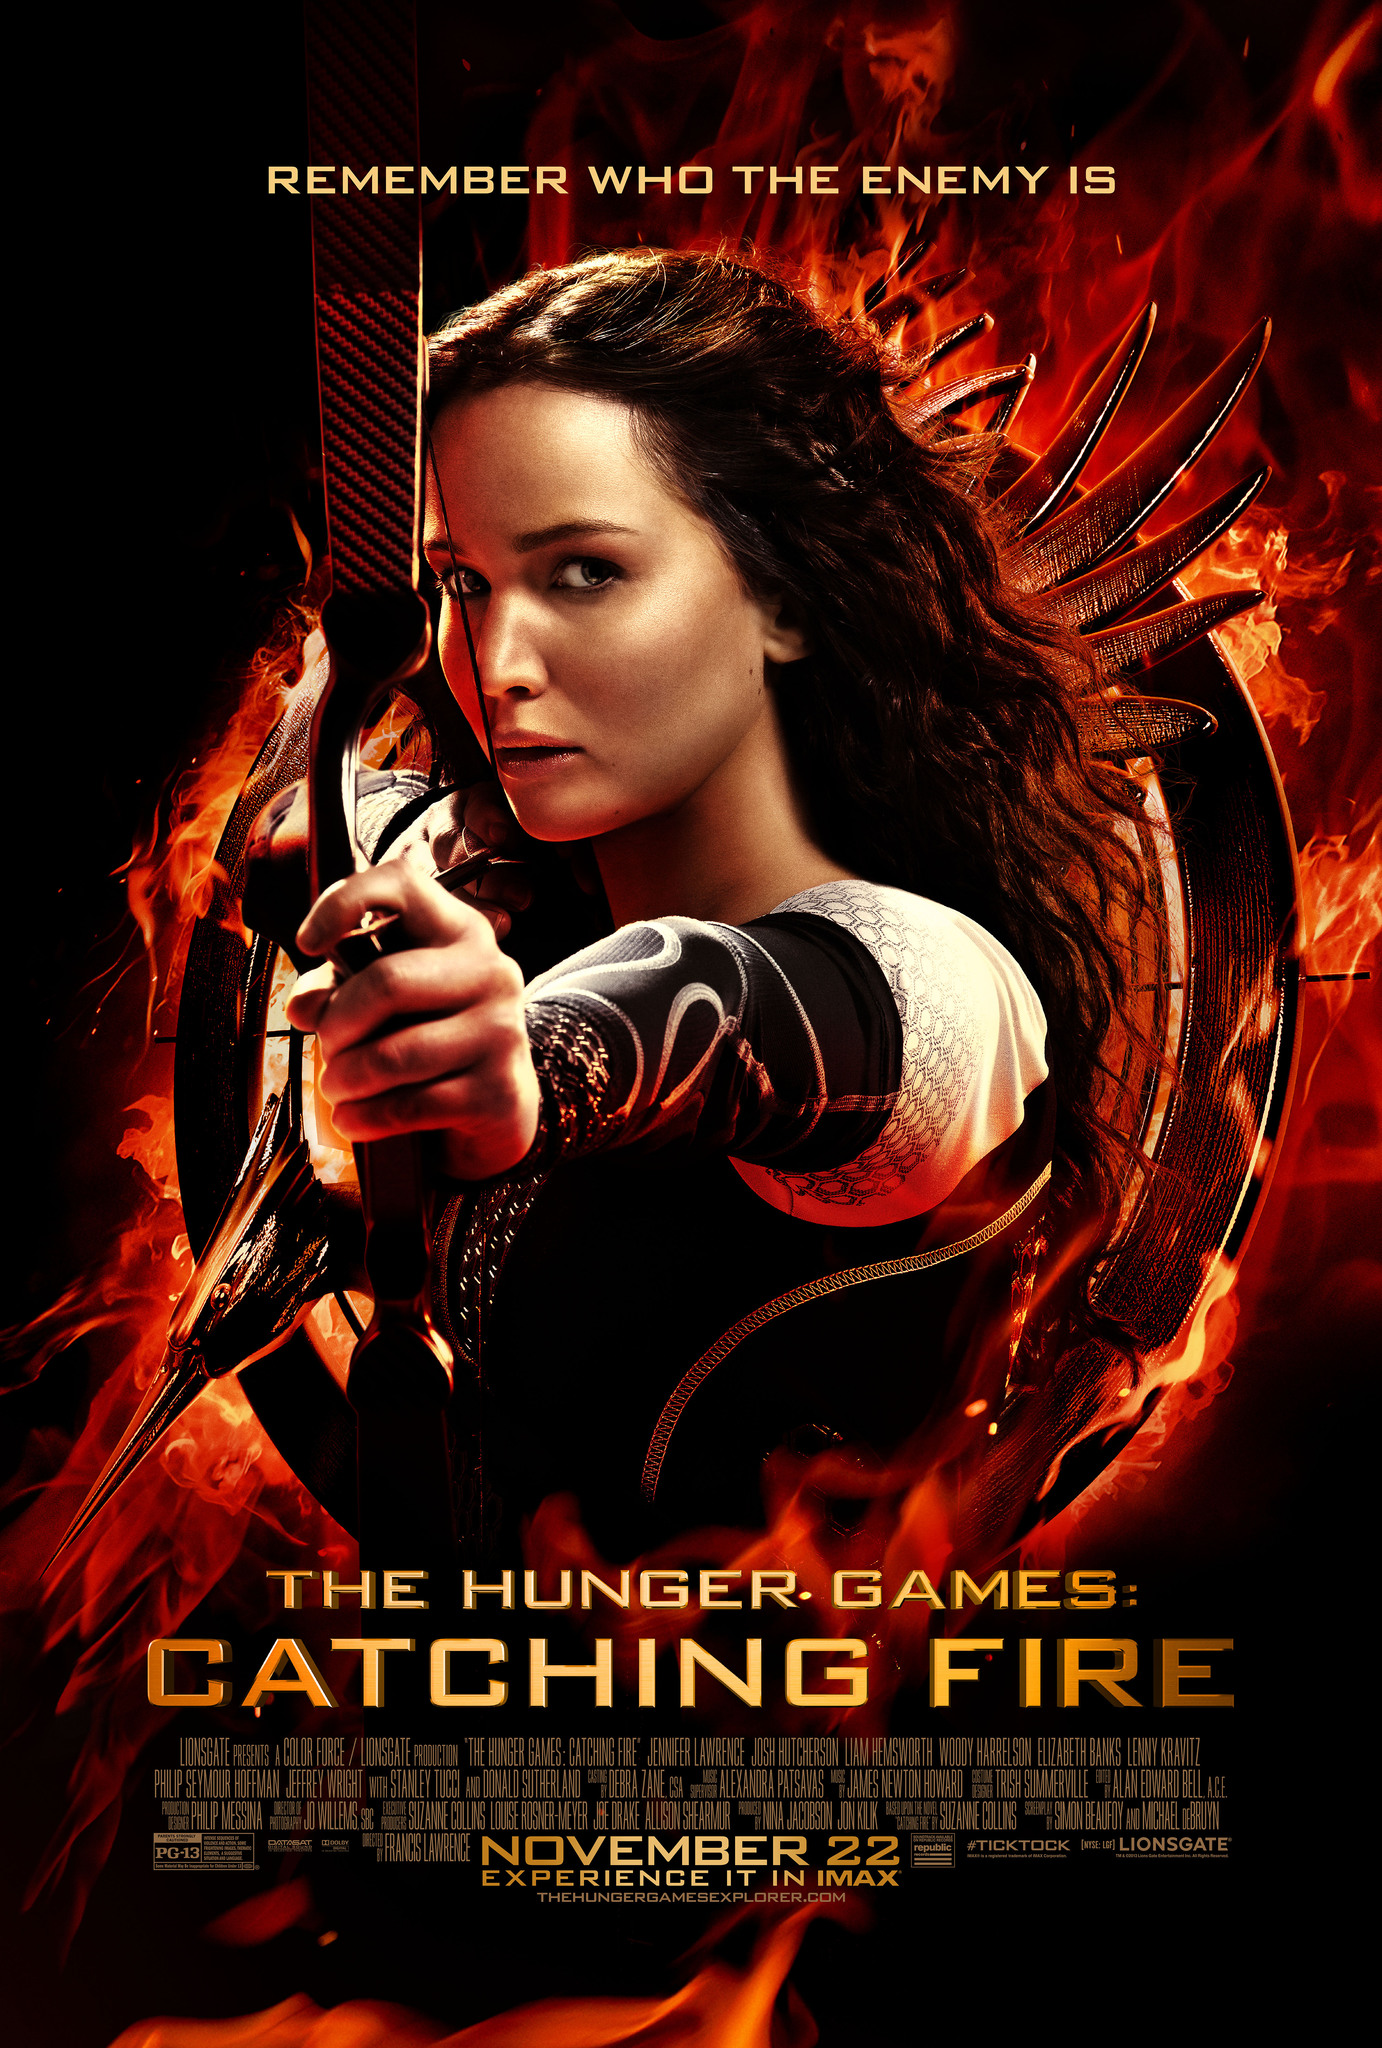 The Hunger Games: Mockingjay - Part 2, The Hunger Games Wiki